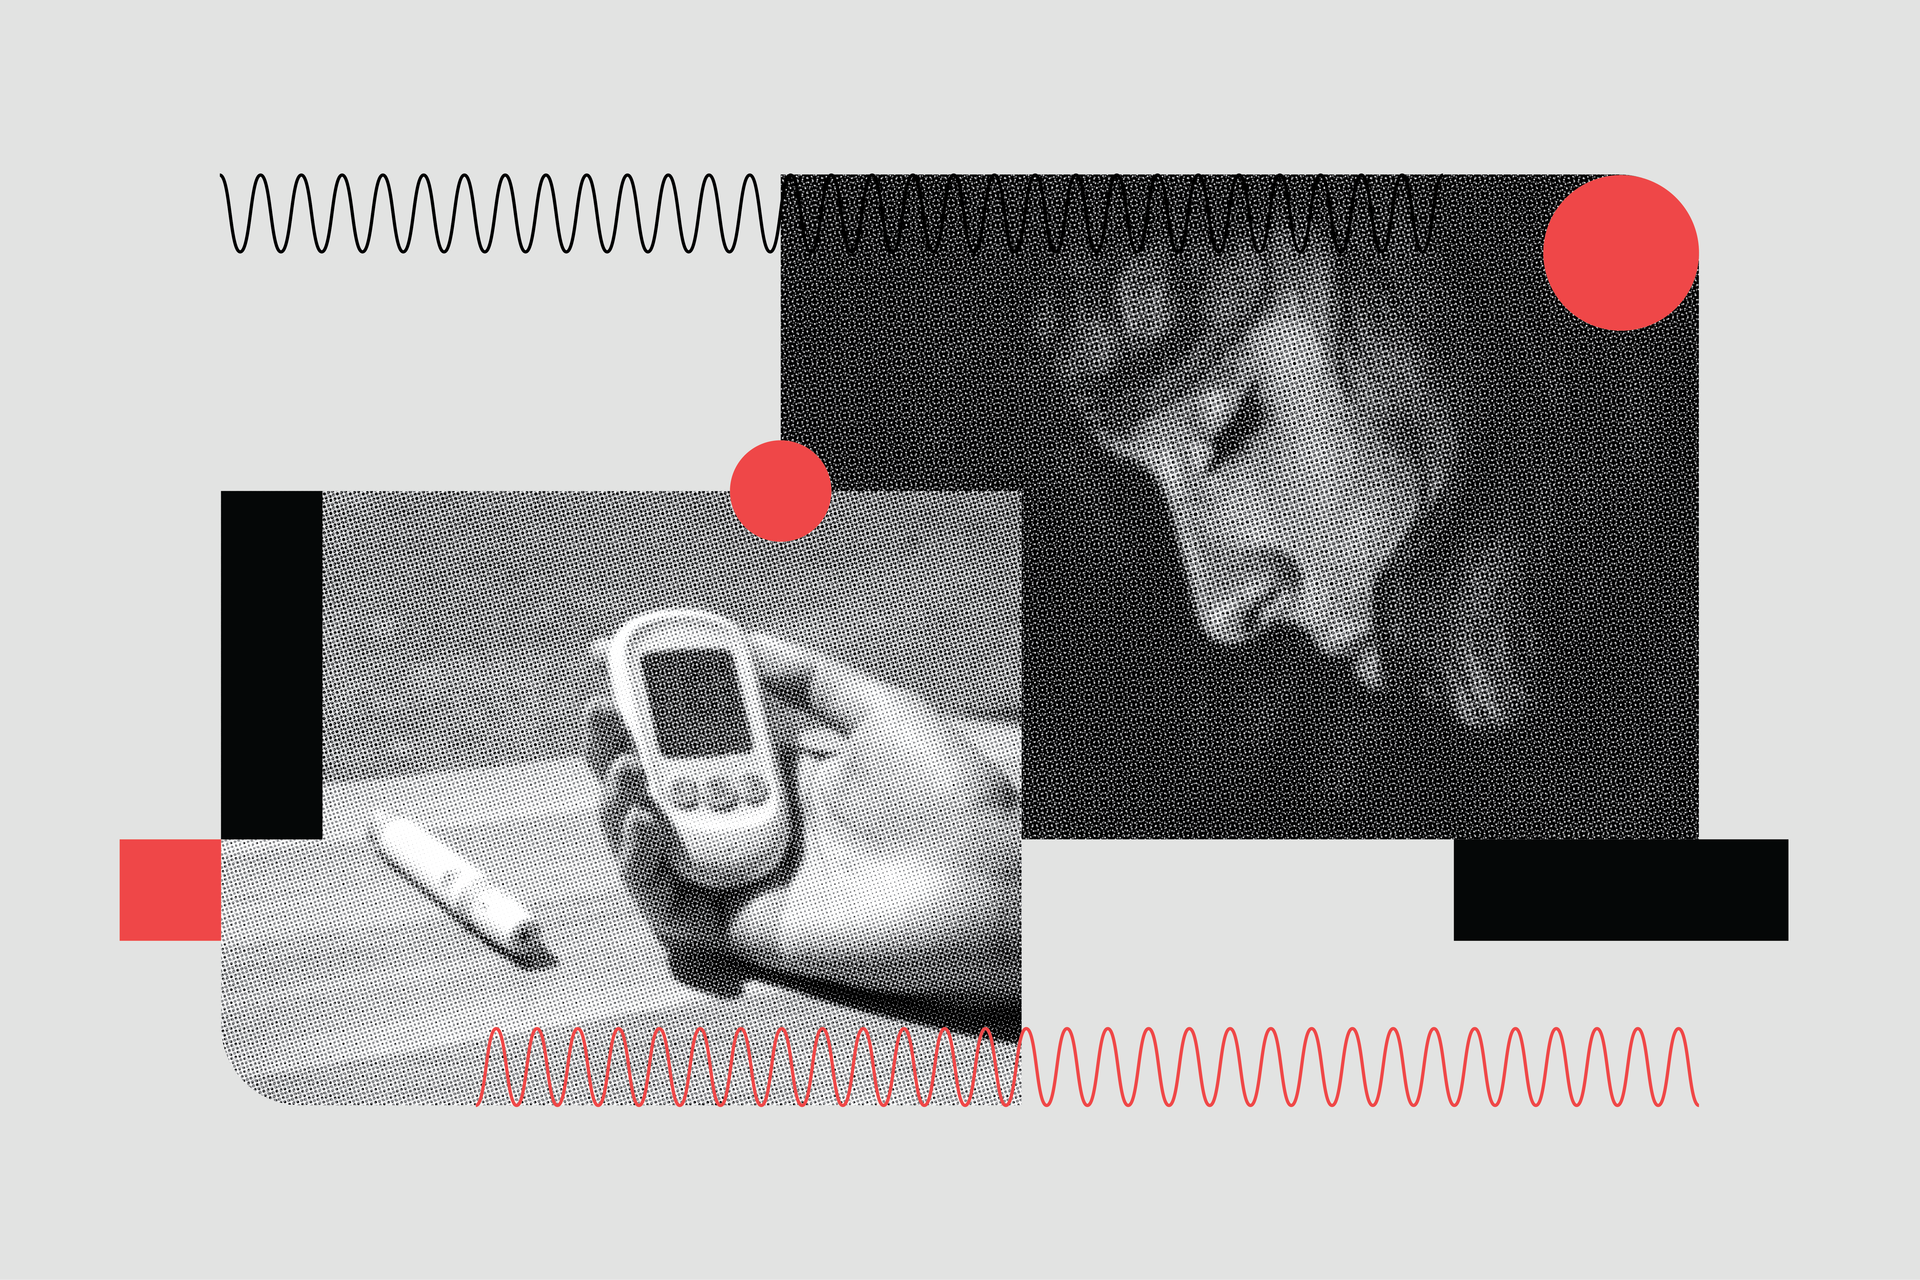 Two black and white images next to each other, with one showing a blood glucose monitor and another showing a person with their eyes closed, sleeping.